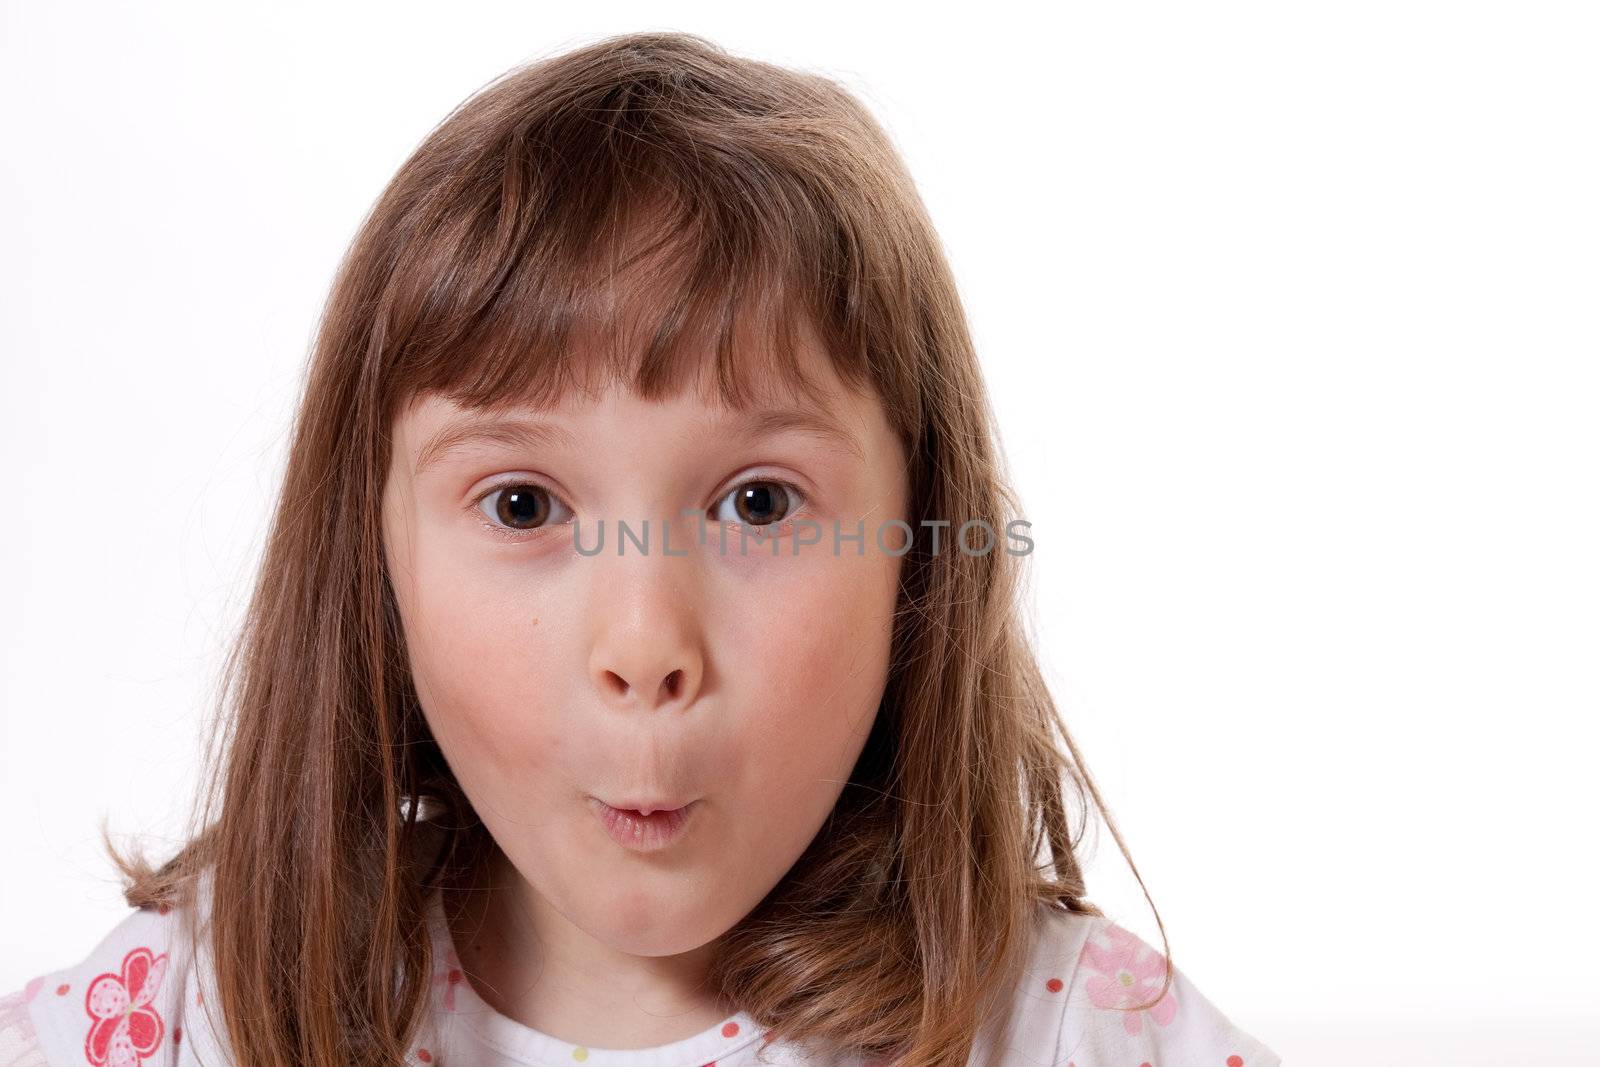 Little girl with a surprised expression